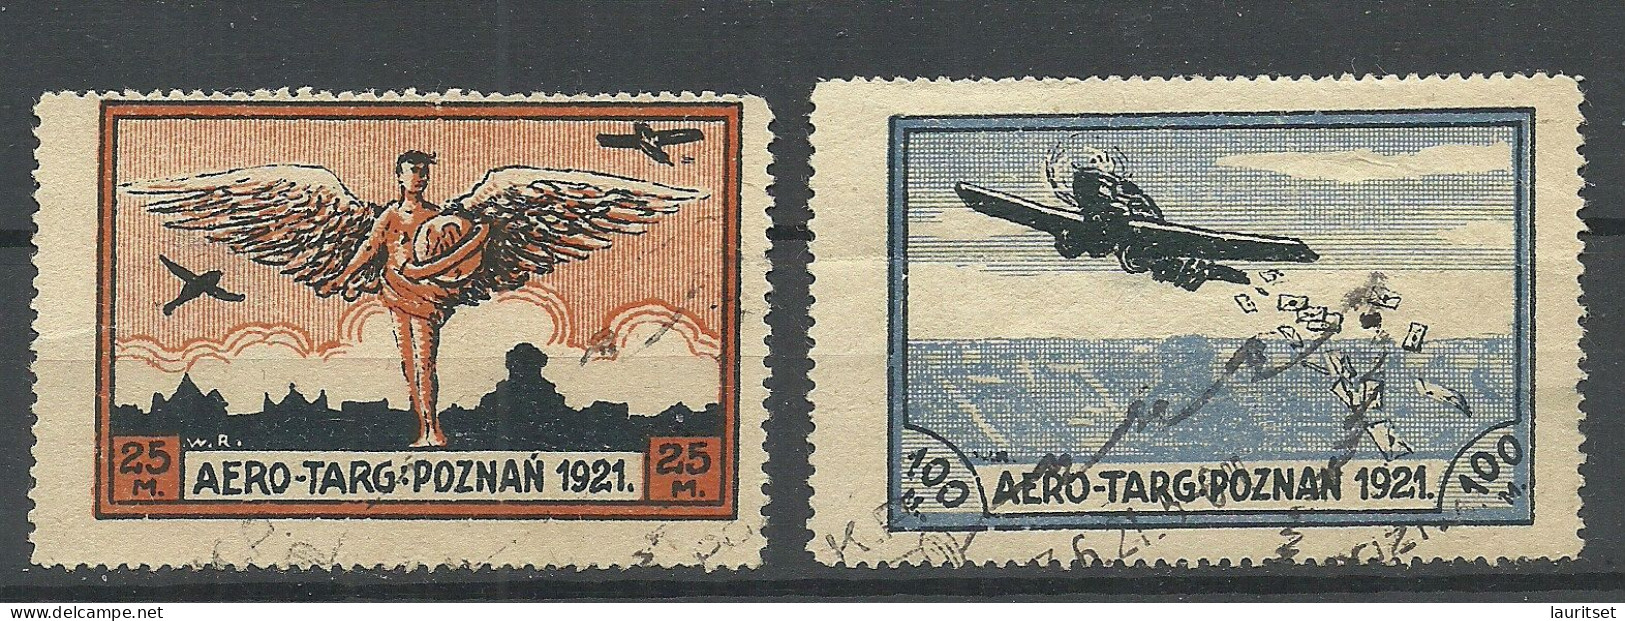 POLEN Poland 1921 Michel I - II Aviation Air Mail Poznan Aero Stamps O NB! Faults! Thinned Places! - Gebruikt